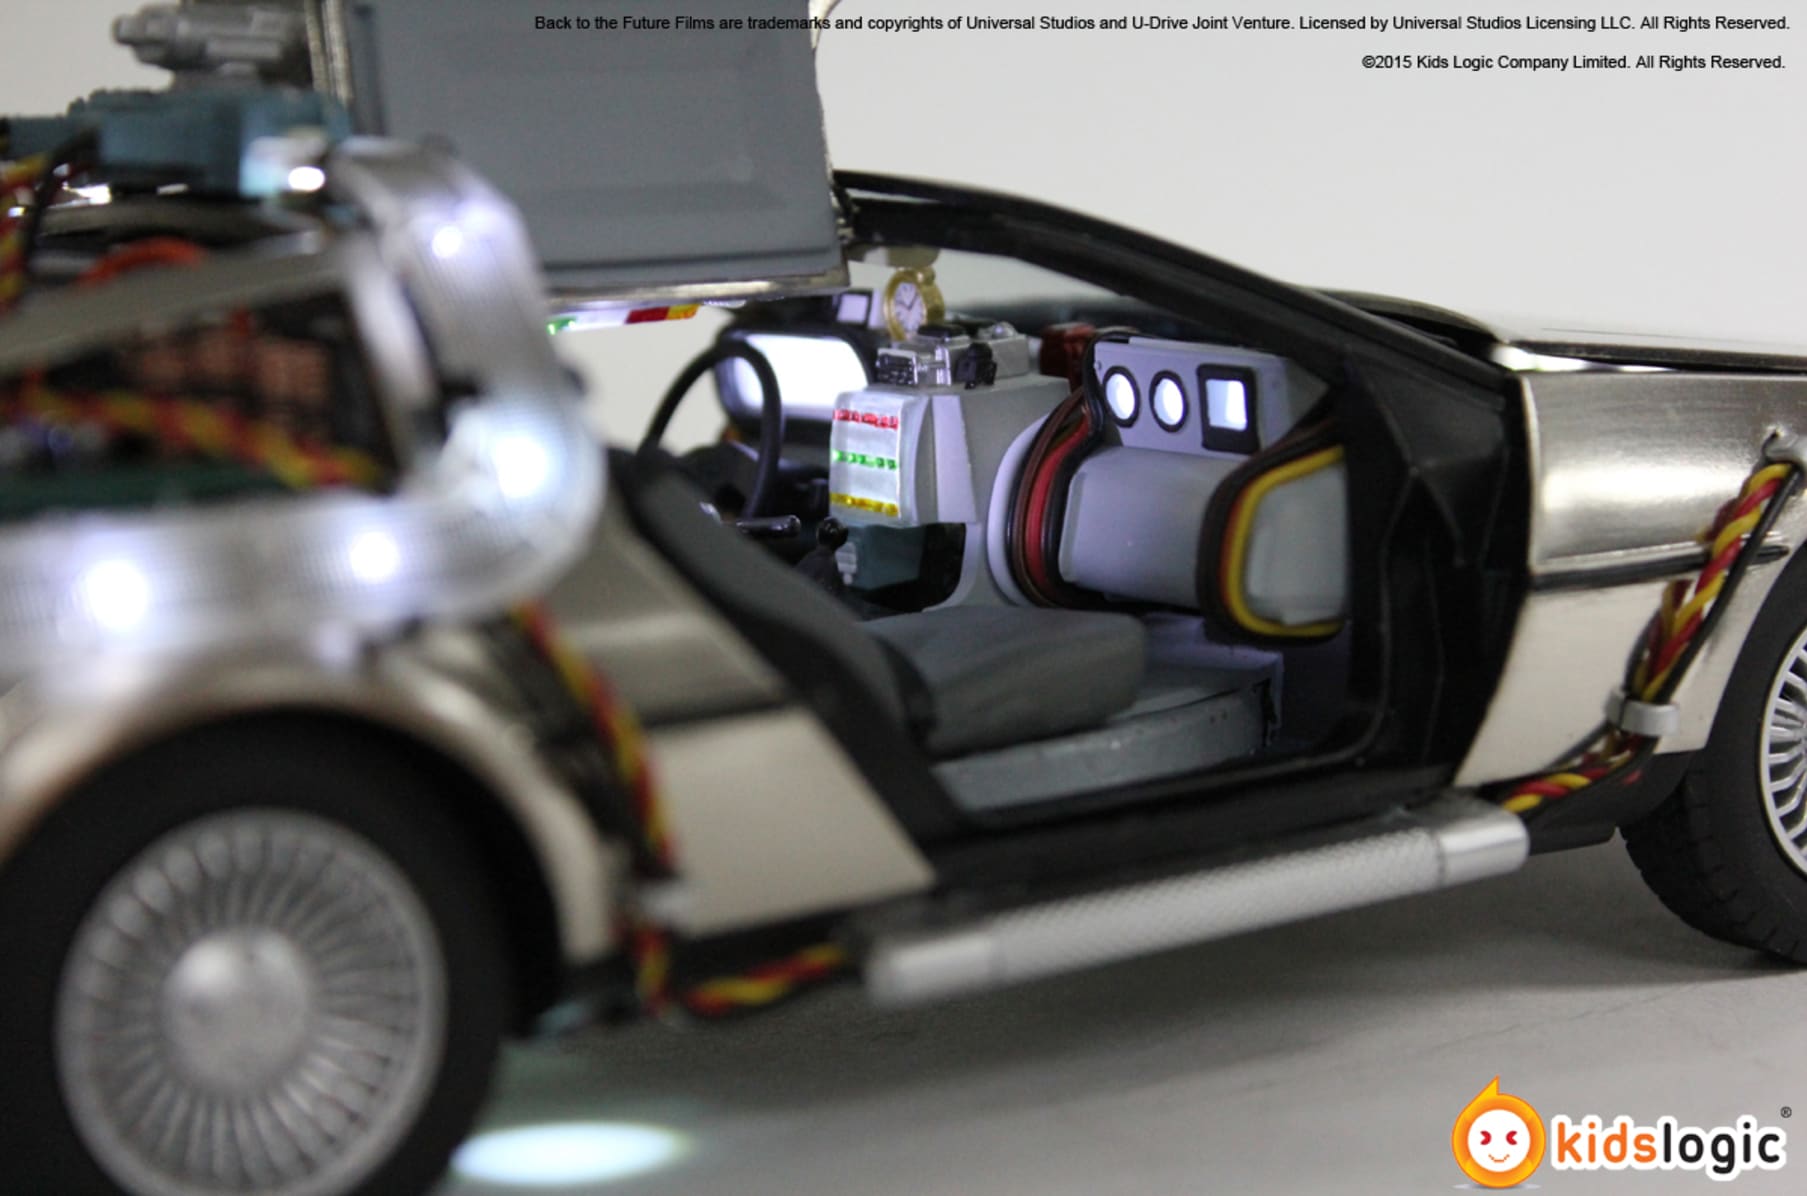 This Awesome 1/20 Scale DeLorean Time Machine That Levitates Is Really Hard  to Get - autoevolution